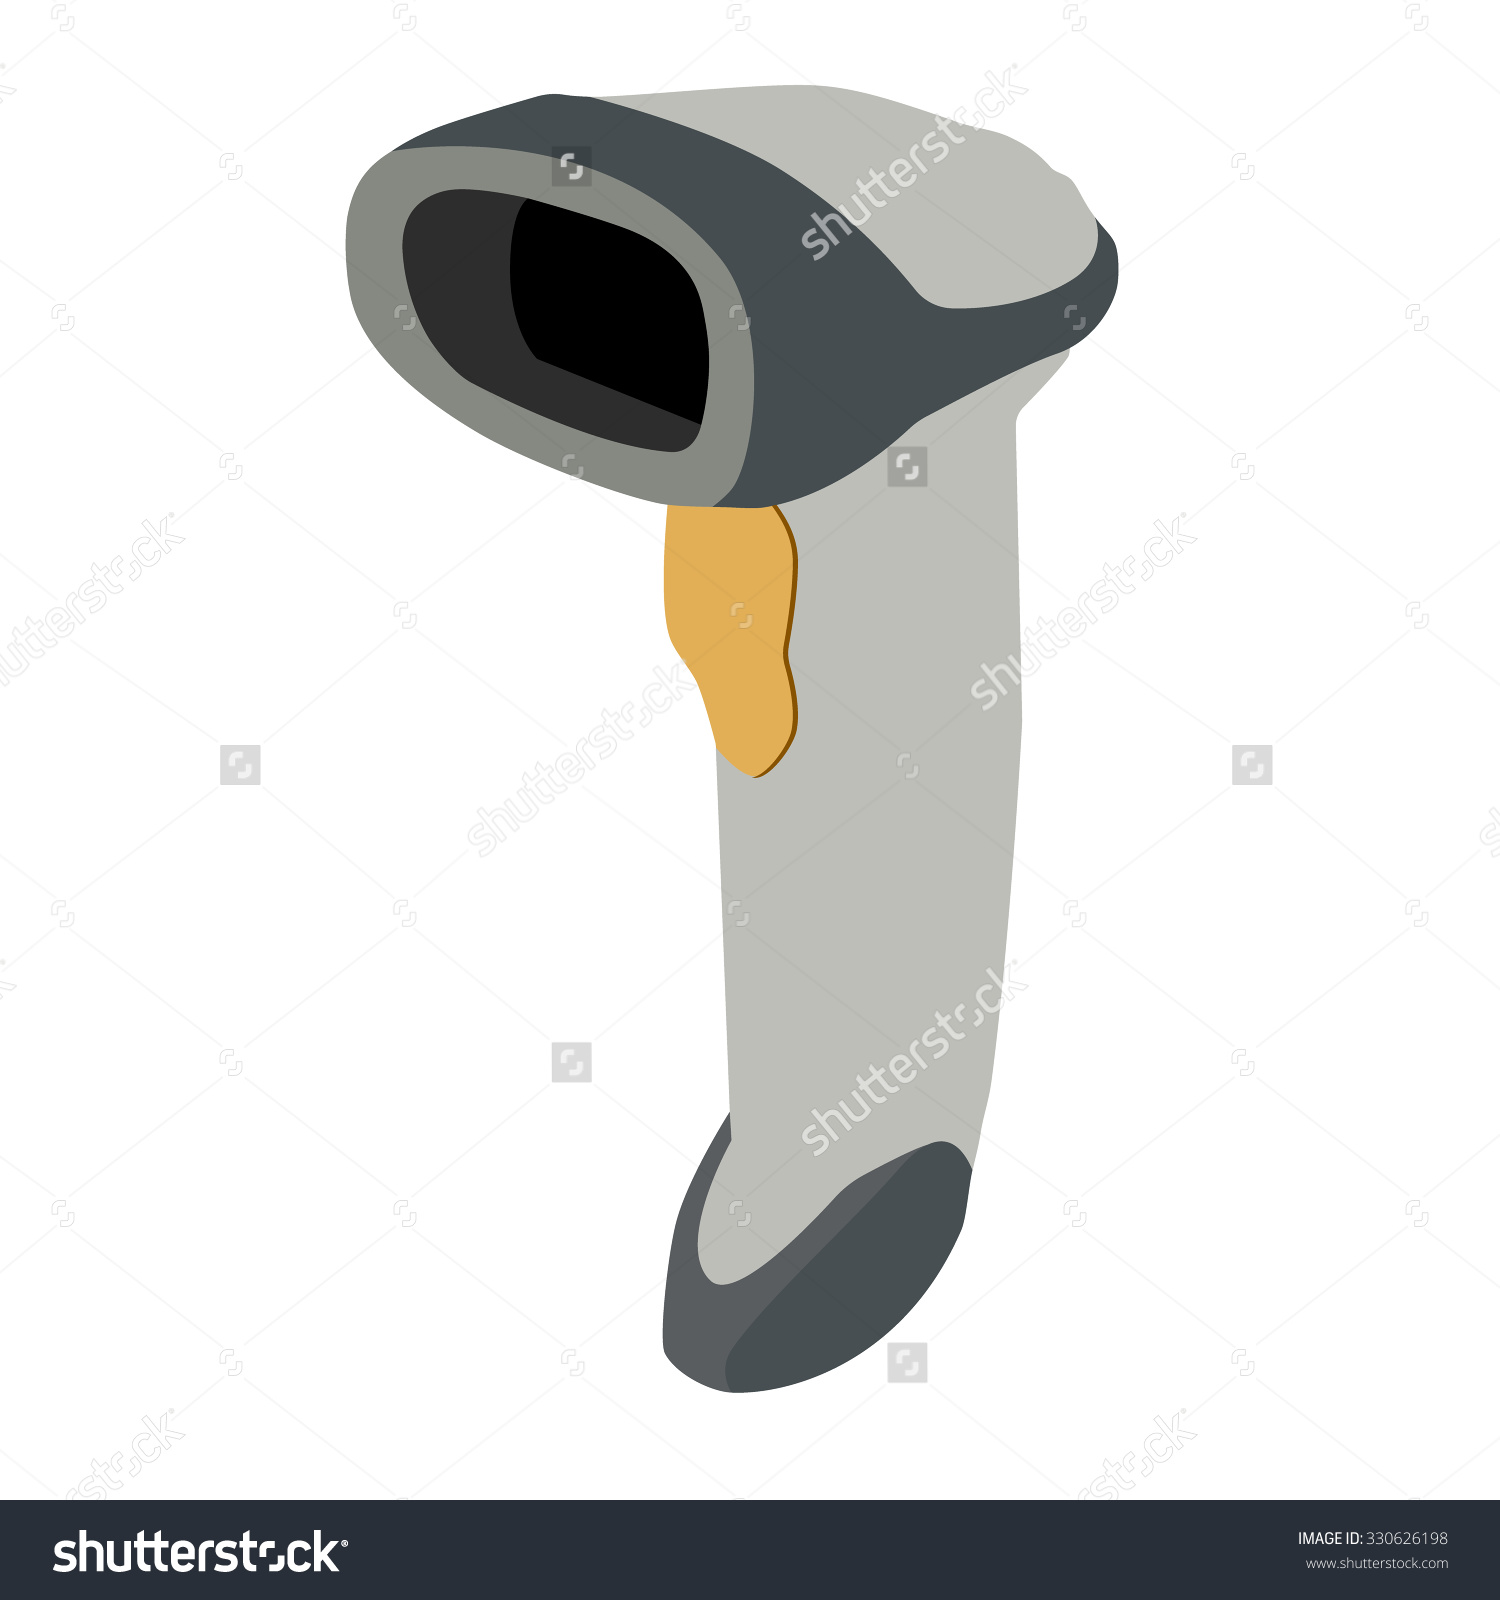 Bar code scanner clipart 20 free Cliparts | Download images on